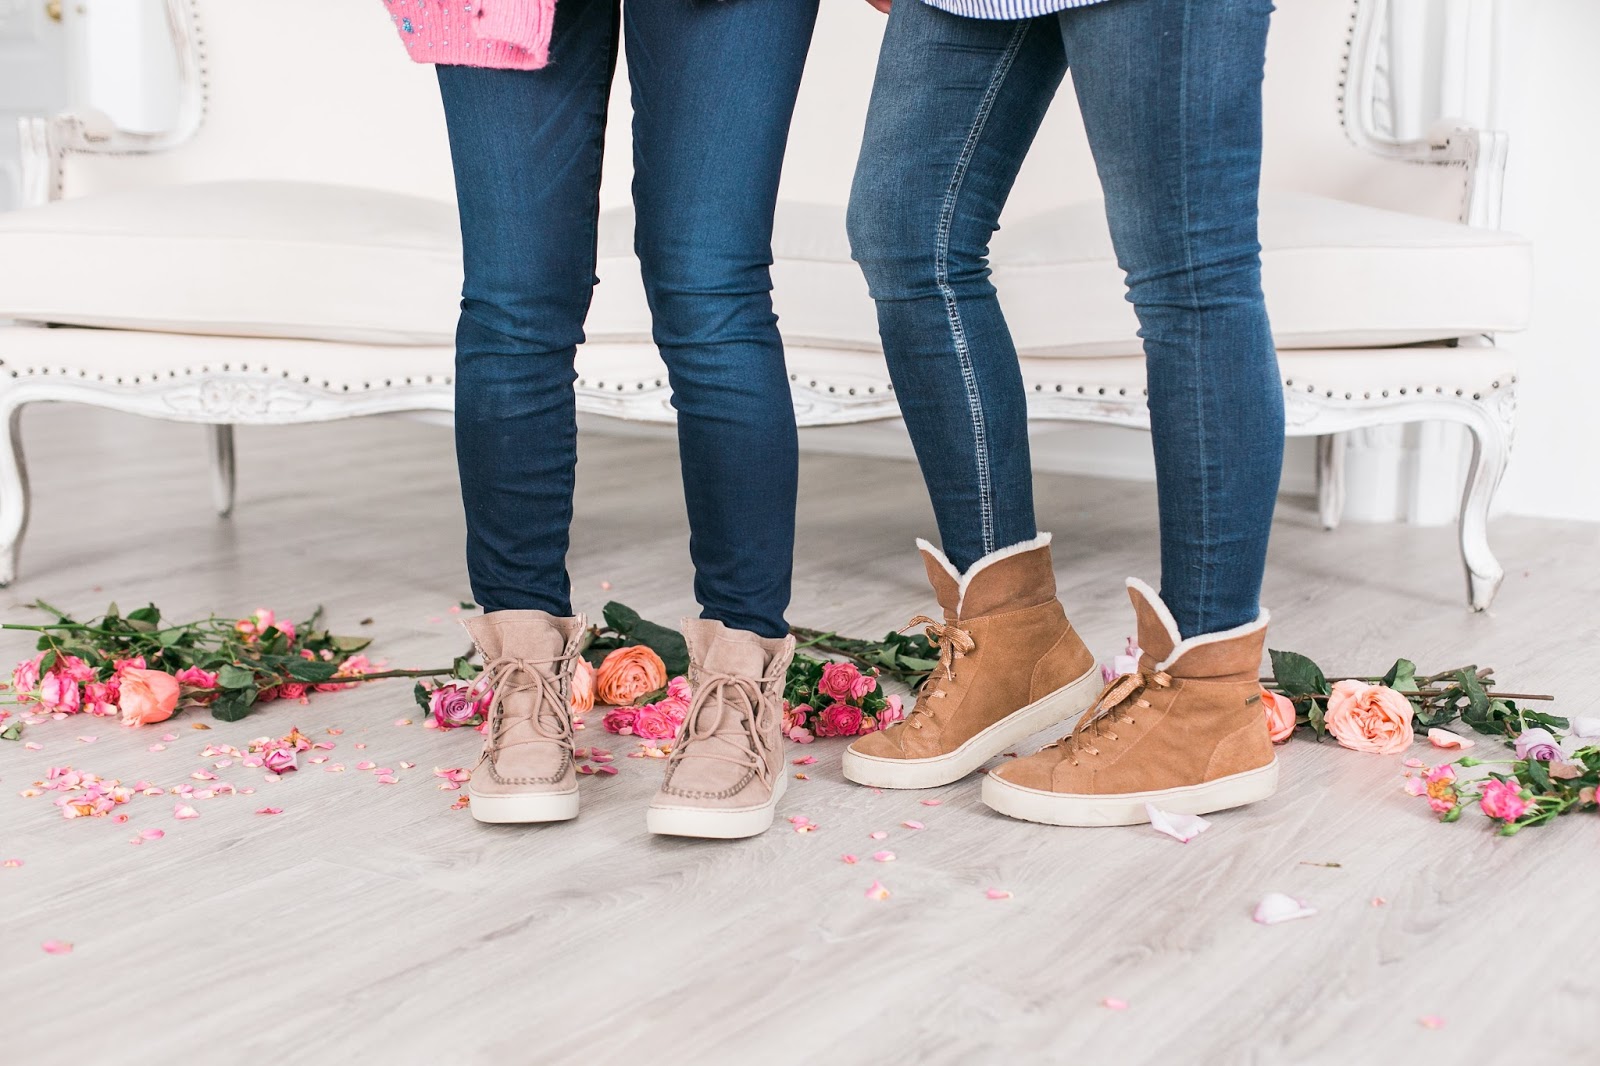 Bijuleni | 2 Transitional Boots You Need For Spring | Sisters wearing matching pink cozy sweaters, skinny jeans and striped shirt. 